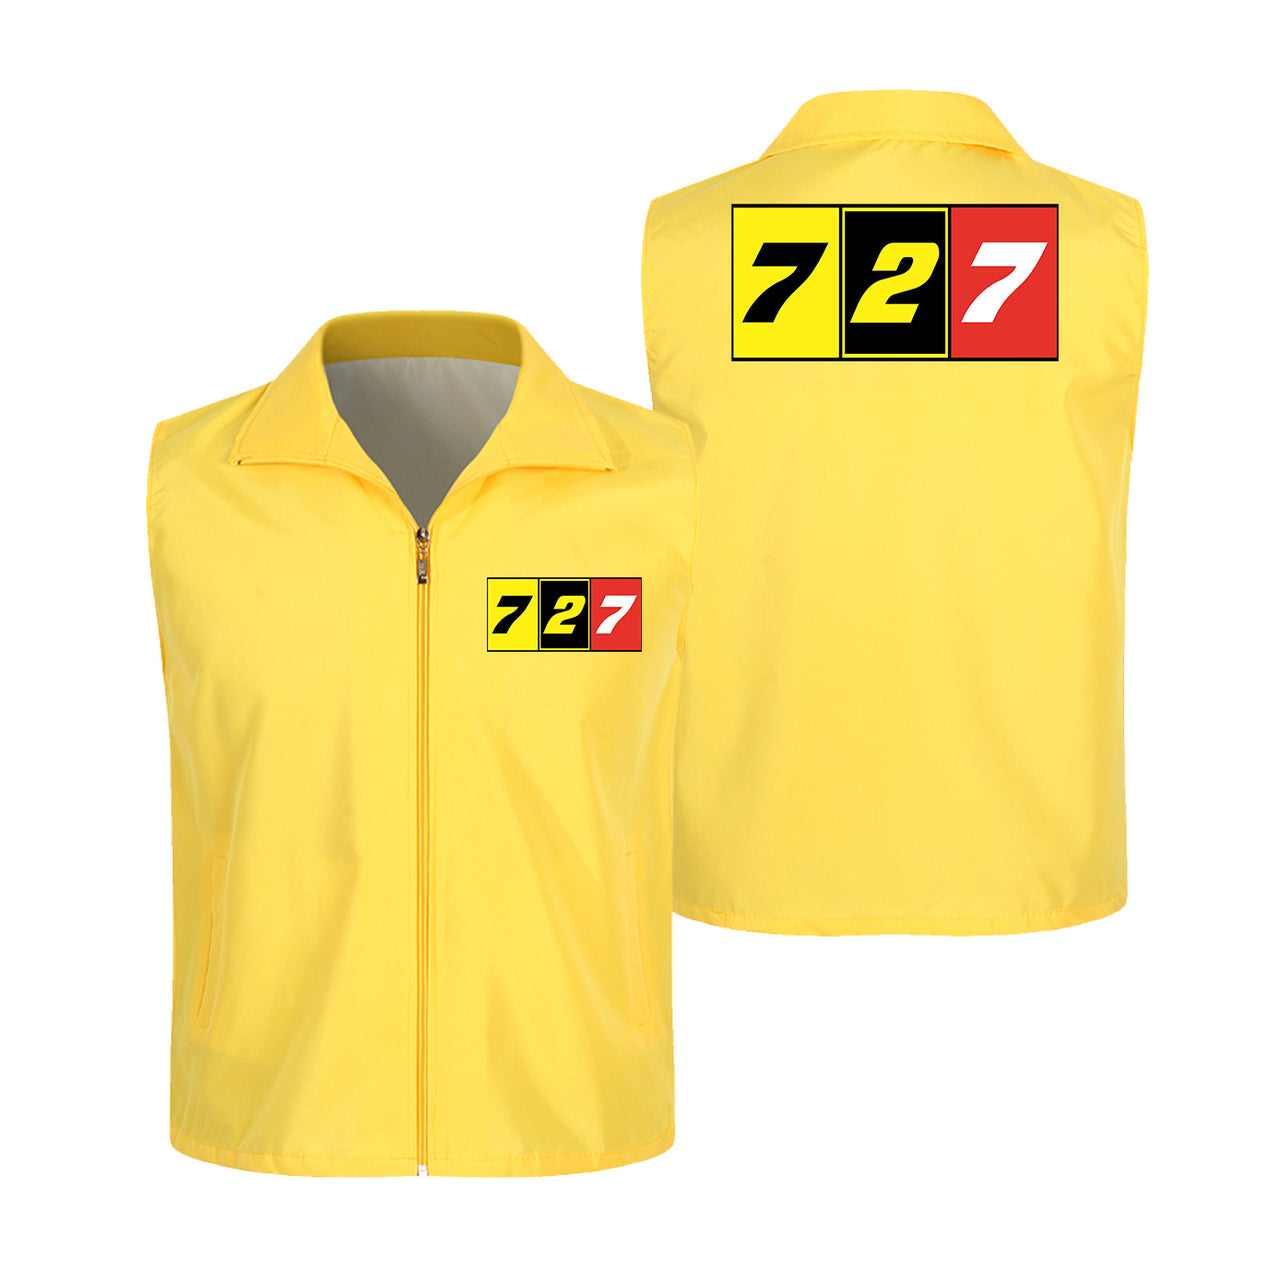 Flat Colourful 727 Designed Thin Style Vests